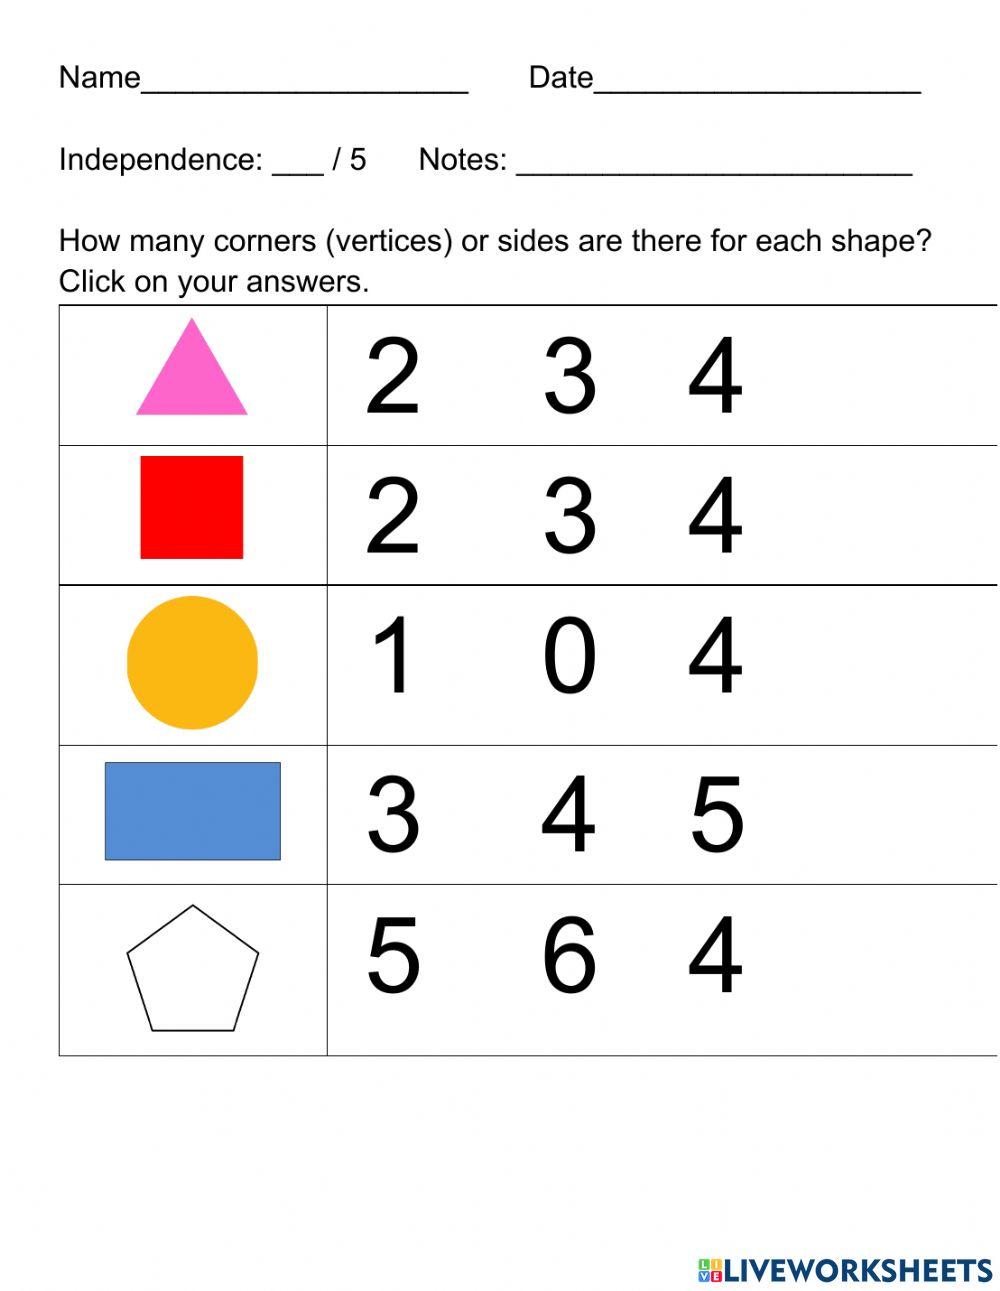 Count Vertices or Corners-Sides